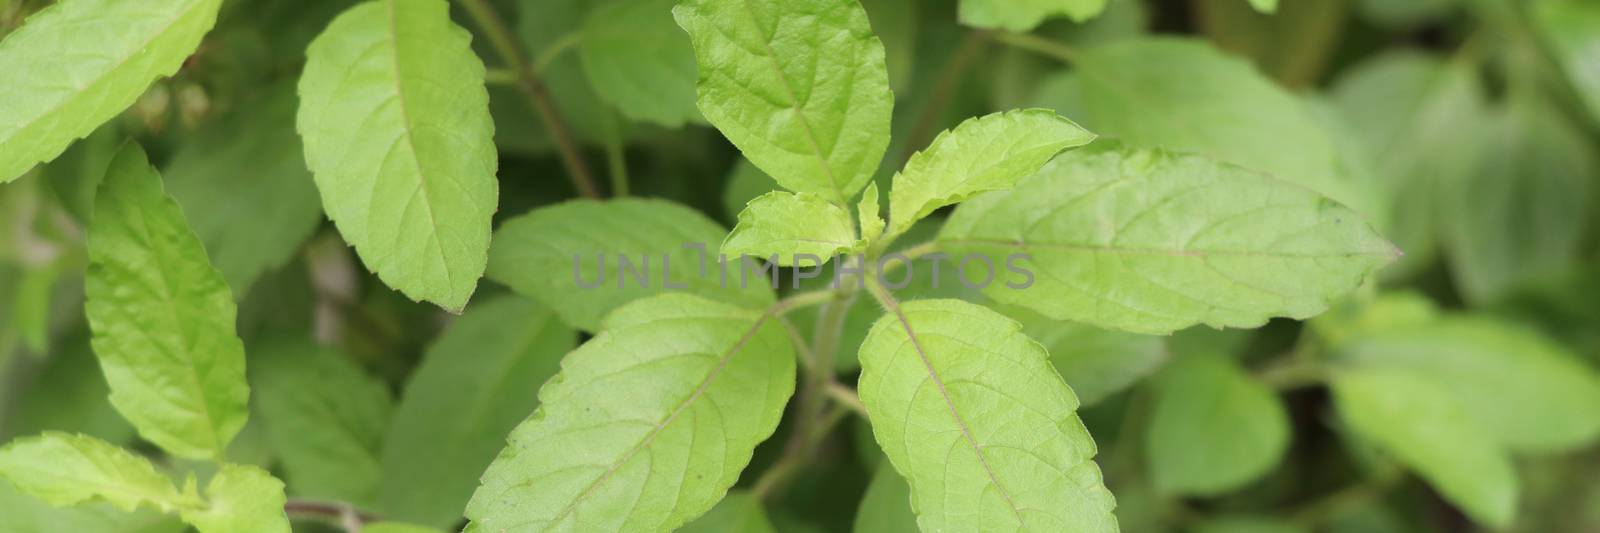 Holy basil leaves on the Holy basil tree banner background. Holy basil leaves are useful herbs.